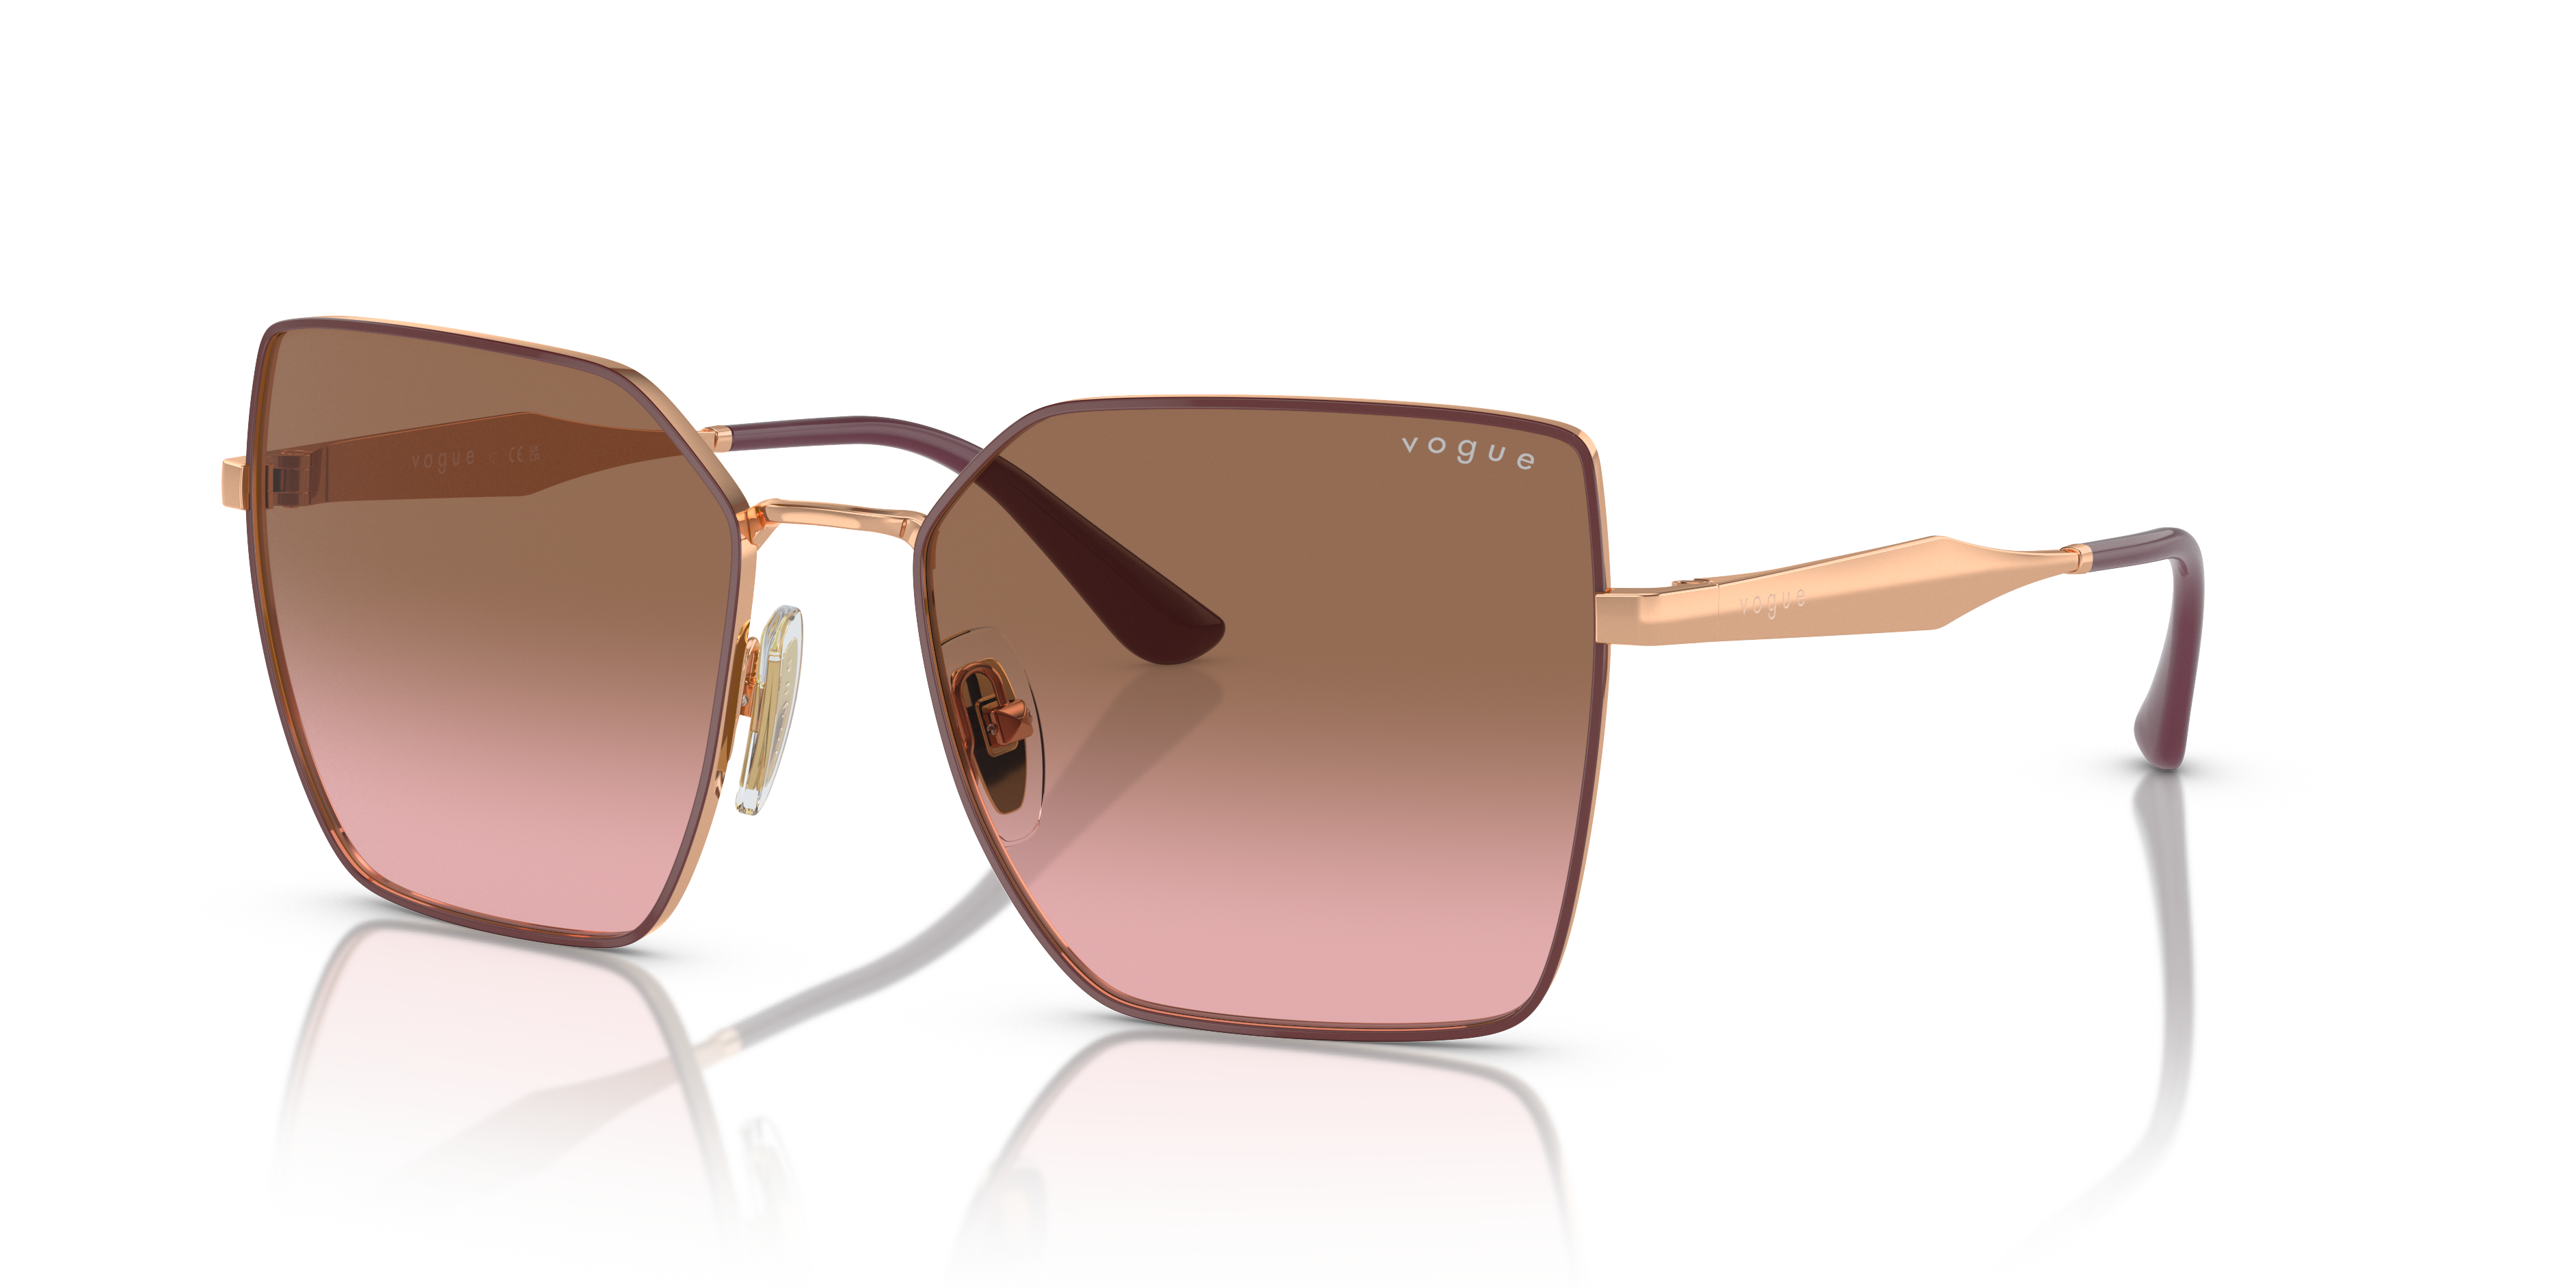 Lebanon Offers - Sunglass Hut Great Catch below 100$ Sexy Vogue Brand  Sunglasses at Sunglass Hut!! For the Cat Eye Style Lovers...Get yours NOW!  Limited Quantities. #lebanon #beirut #ads #marketing #shopping #watches #